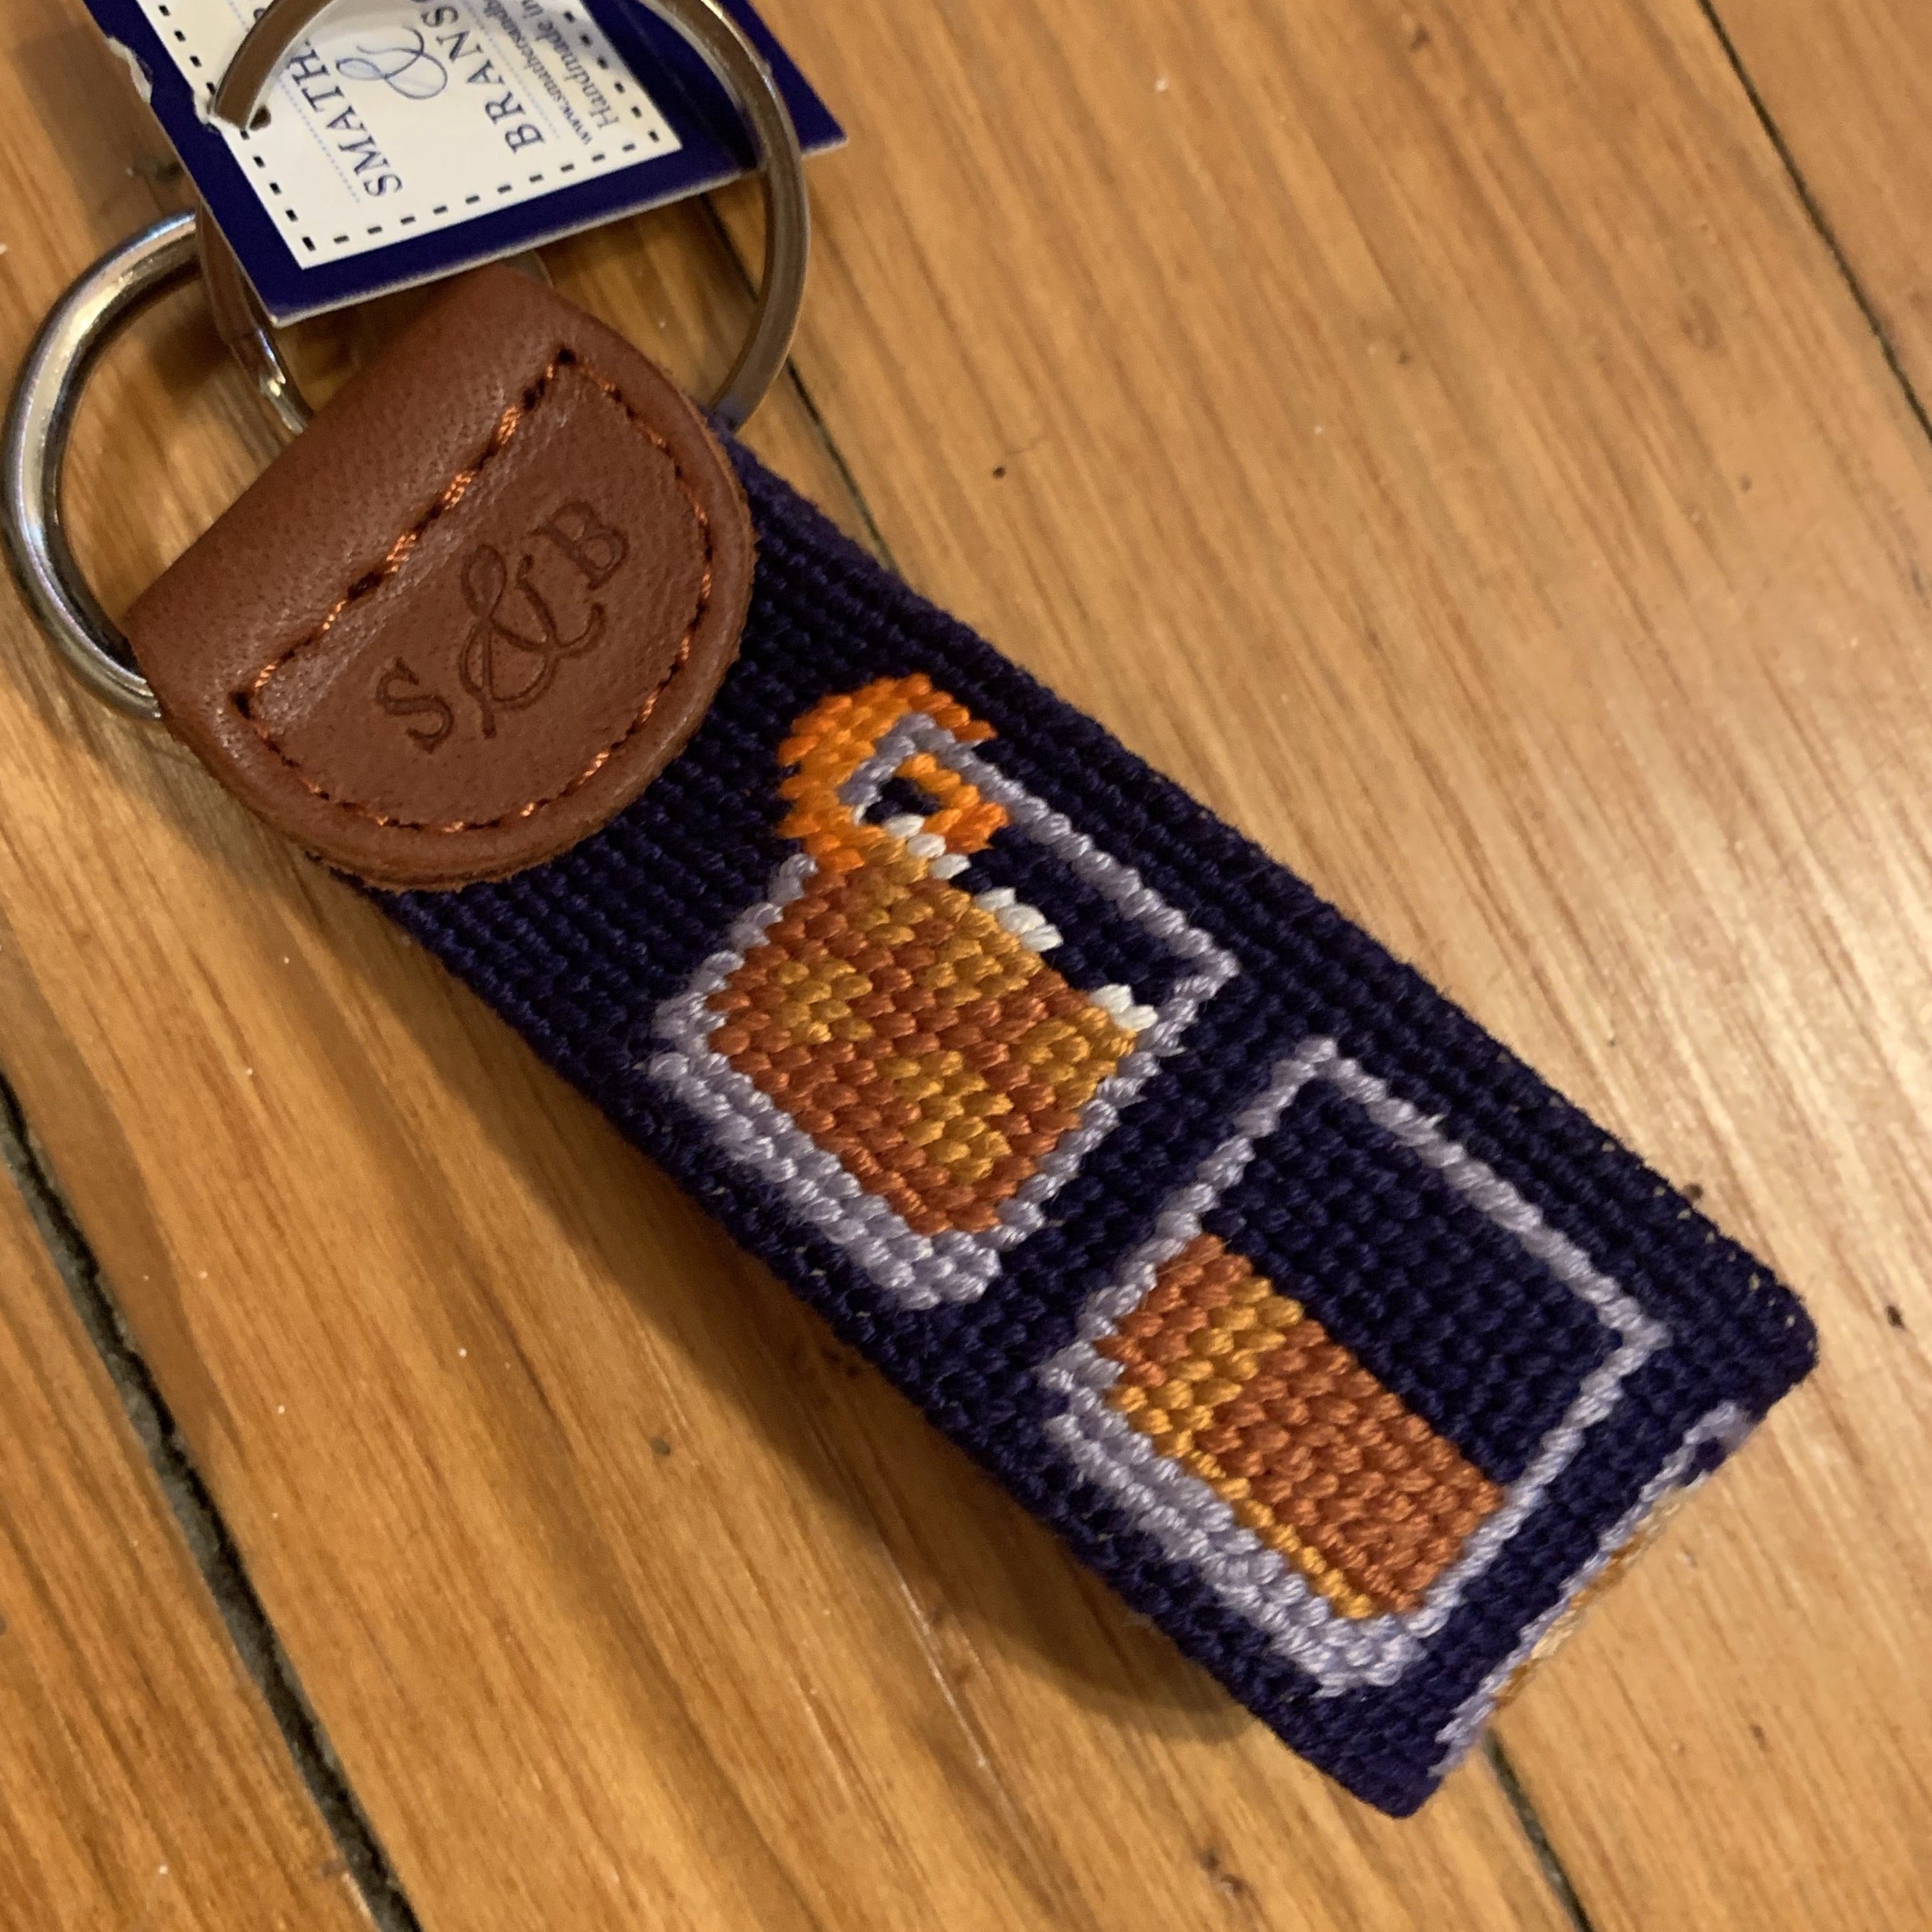 St. Louis Blues Needlepoint Key Fob at Smathers and Branson